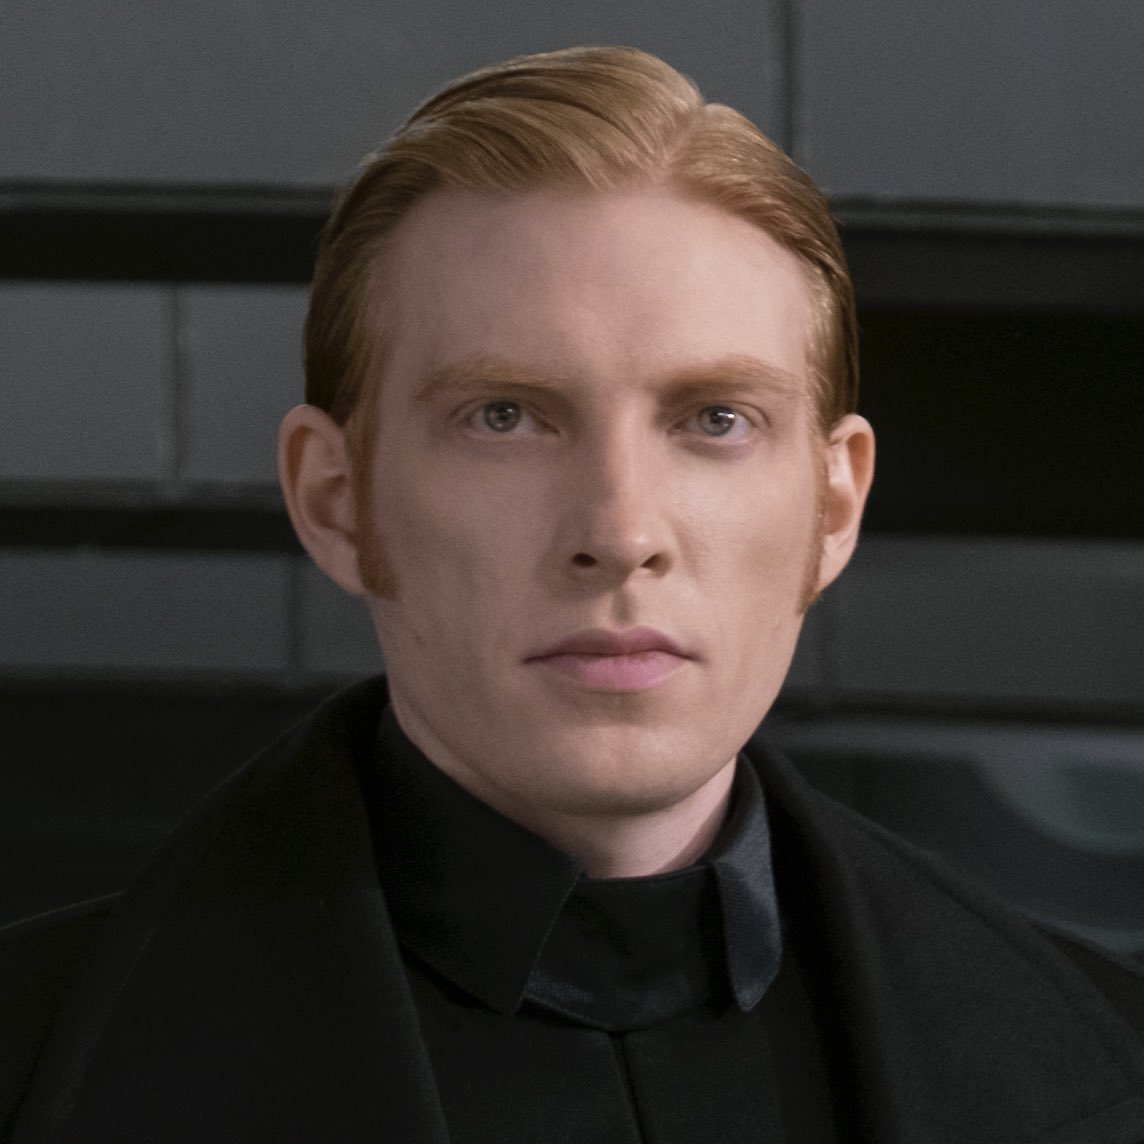 Armitage Hux thinks coffee is for the weak. He leaves his tea bags in the entire time he’s drinking it so that it gets all bitter and full of tannins.